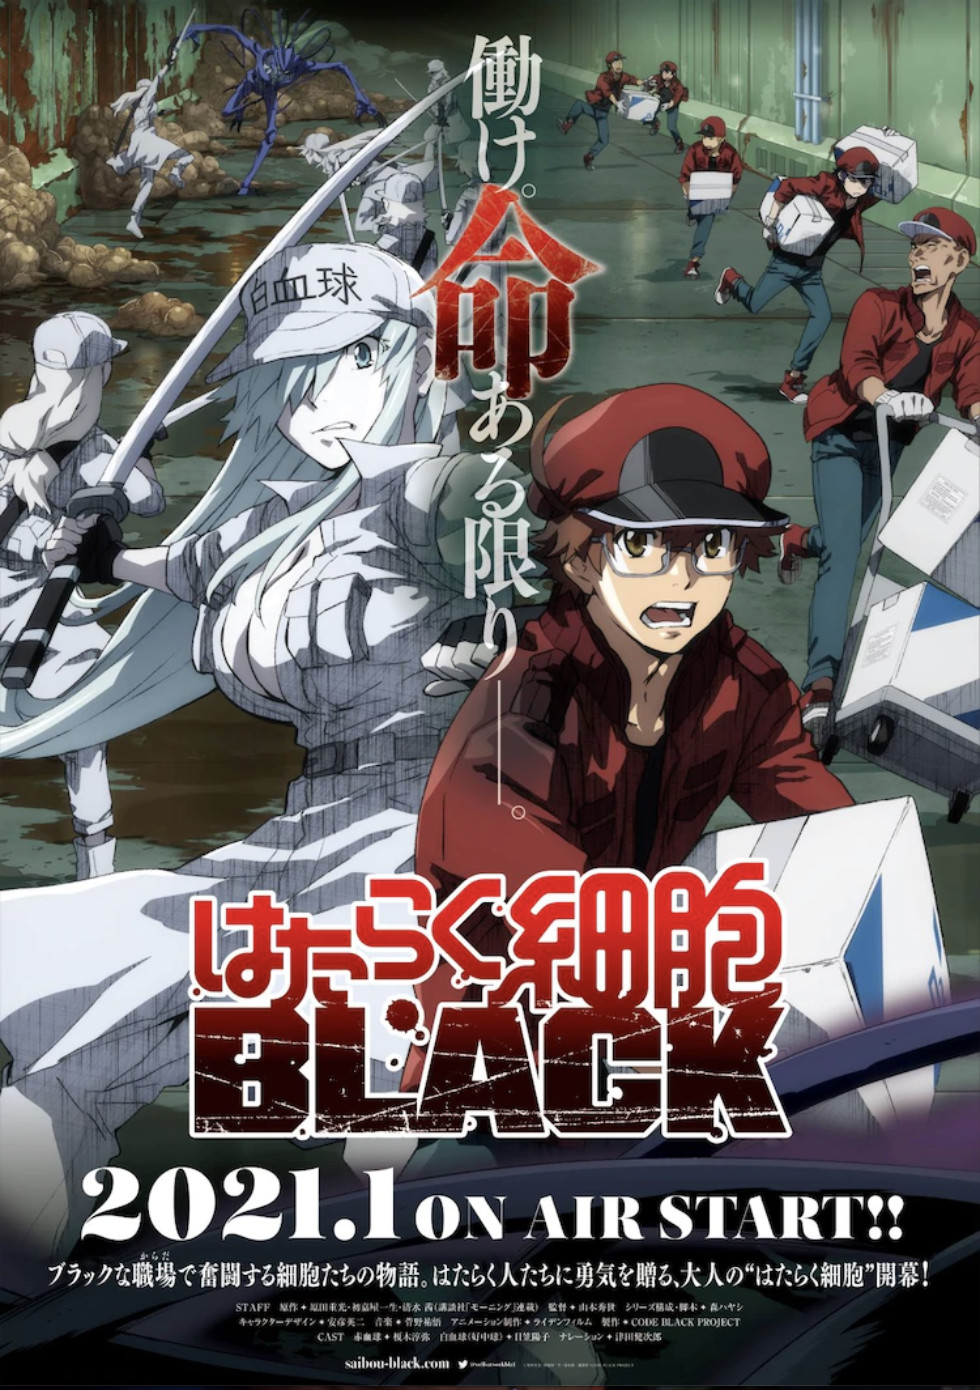 Cells At Work Code Black Anime To Air In January Anime News